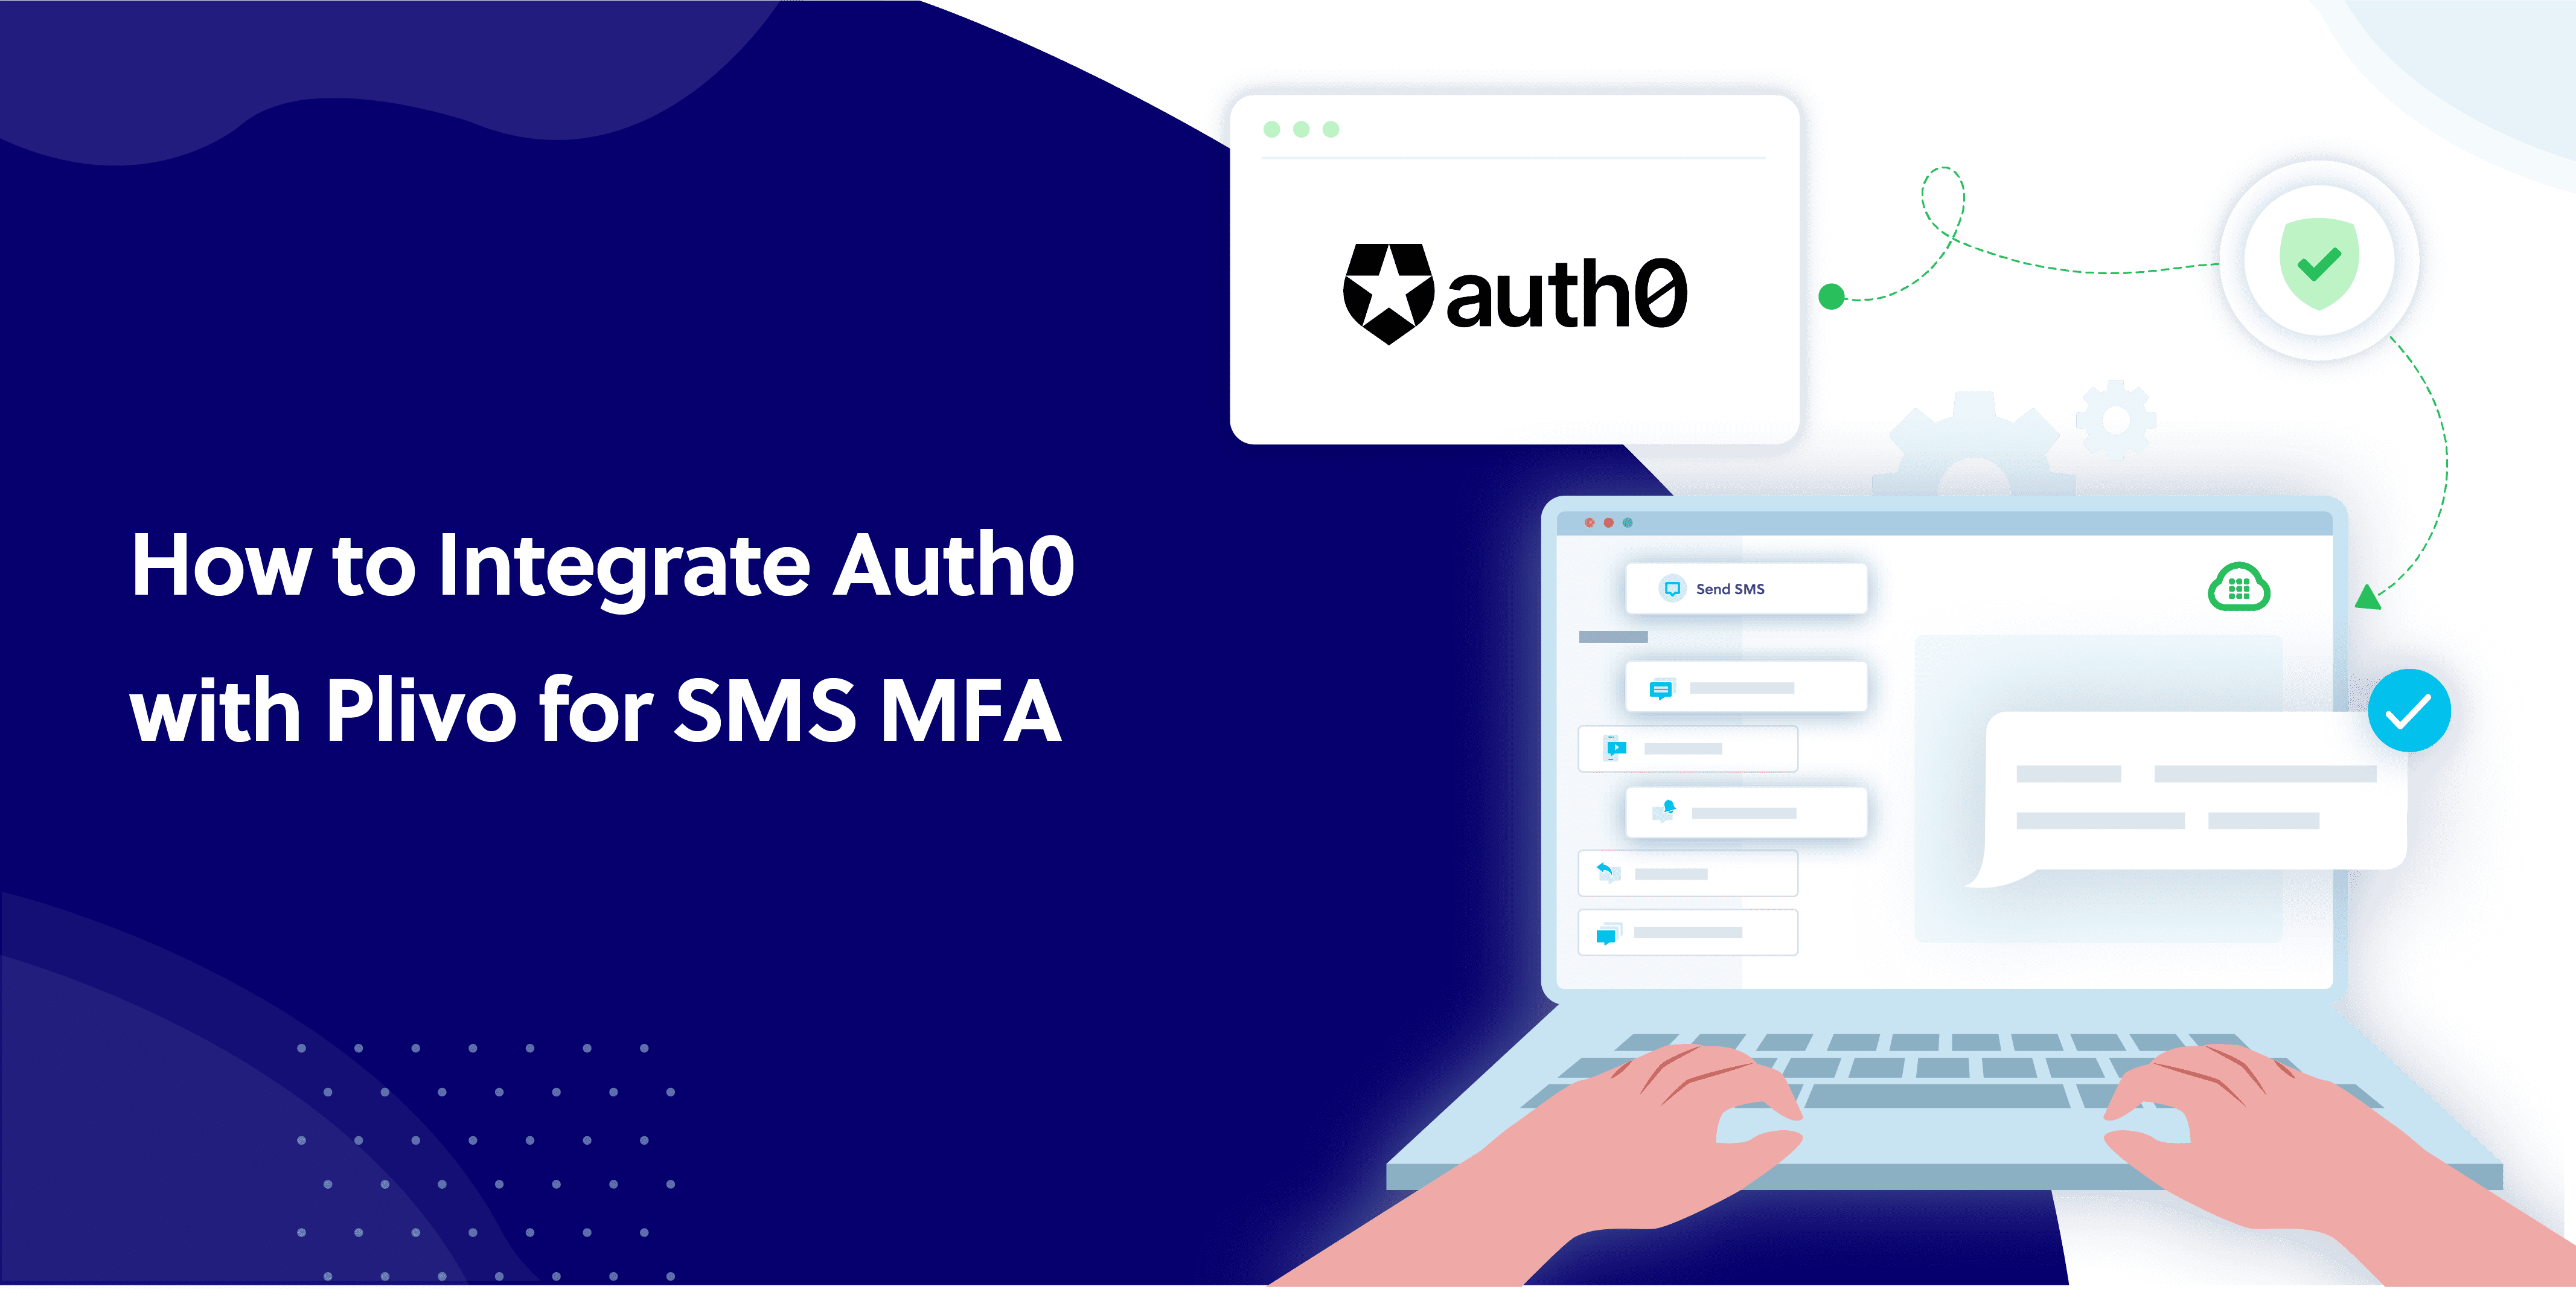 How to Integrate Auth0 with Plivo for SMS MFA